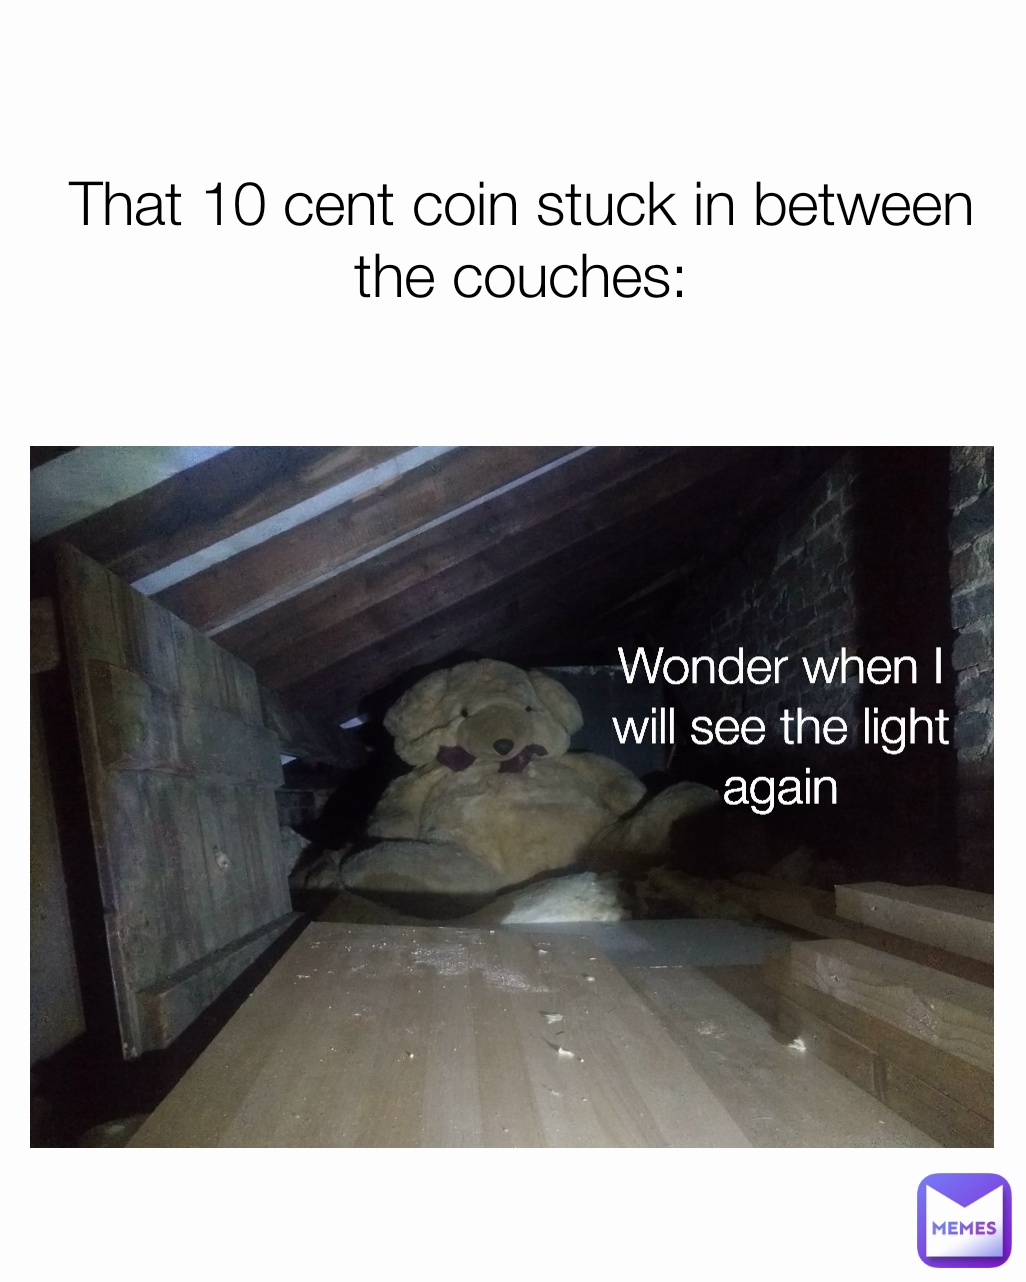 That 10 cent coin stuck in between the couches: Wonder when I will see the light again